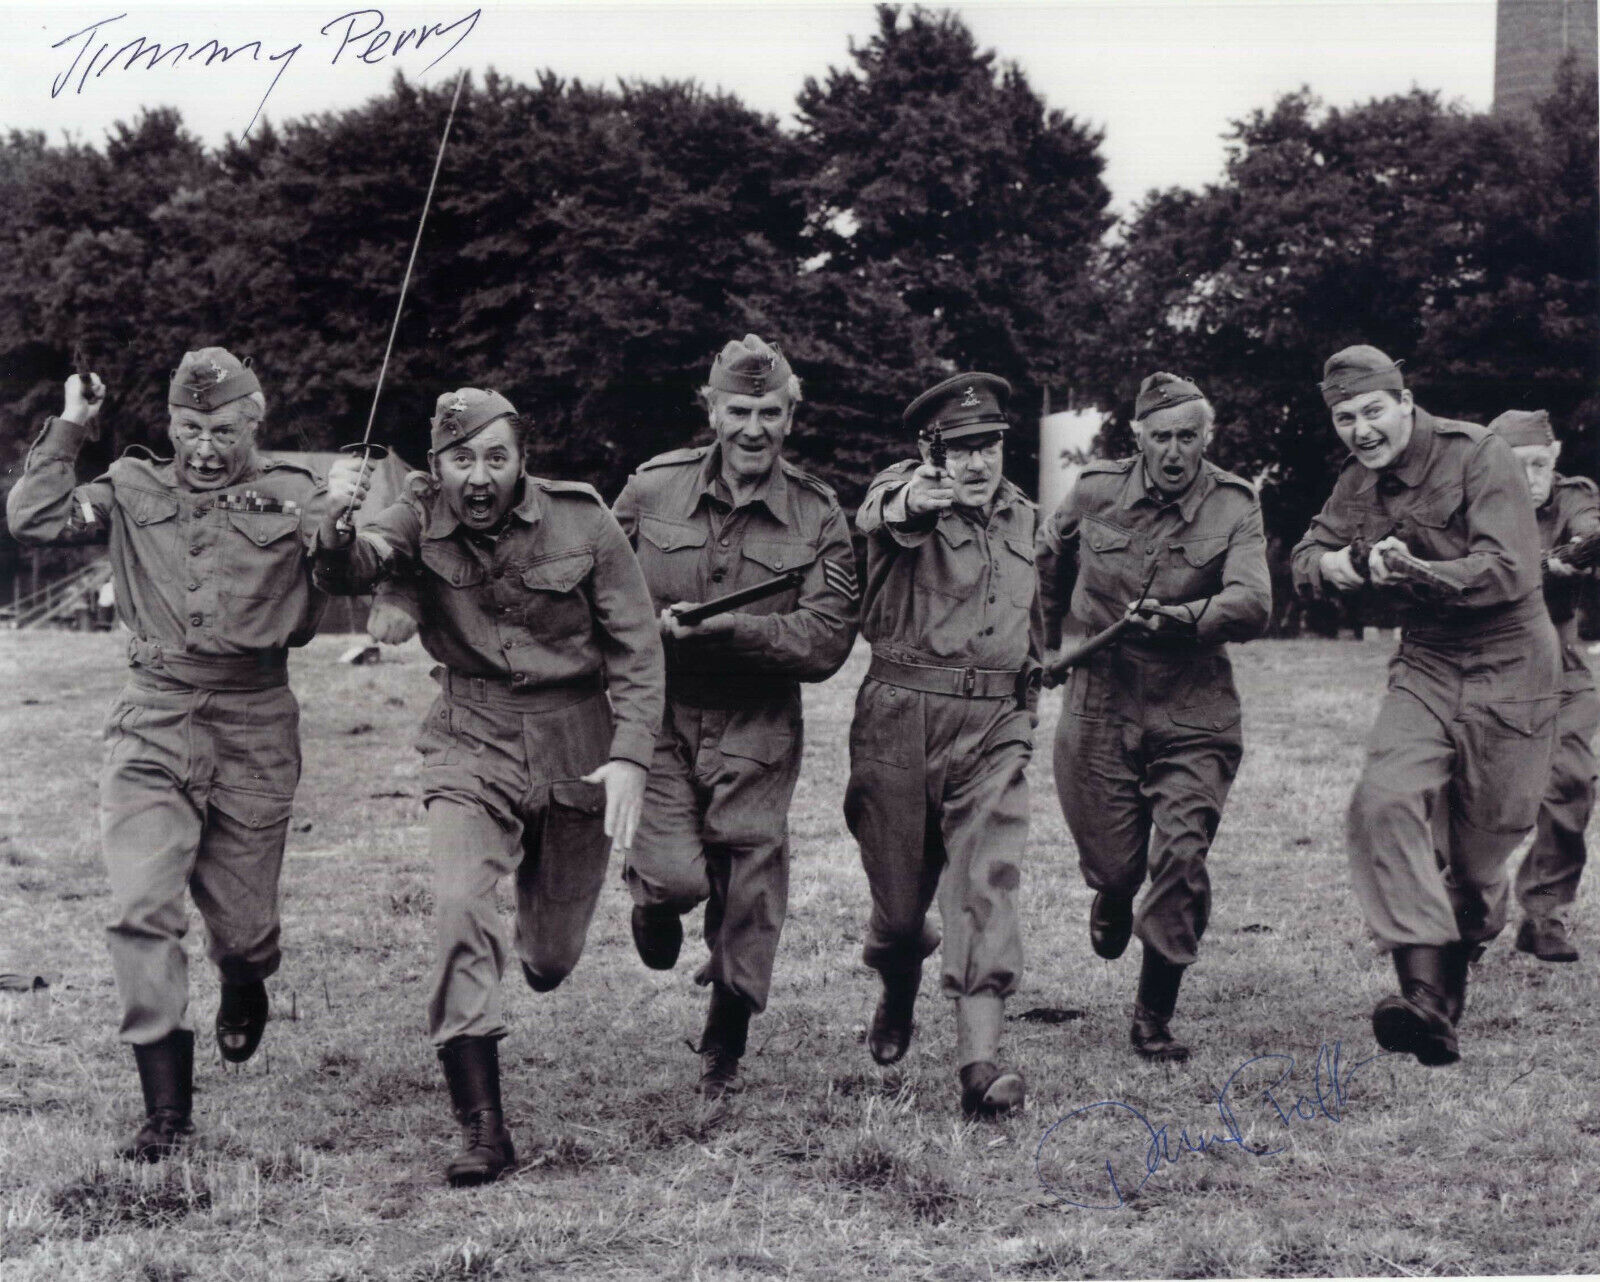 JIMMY PERRY & DAVID CROFT Signed Photo Poster paintinggraph - TV DAD'S ARMY Writers - preprint